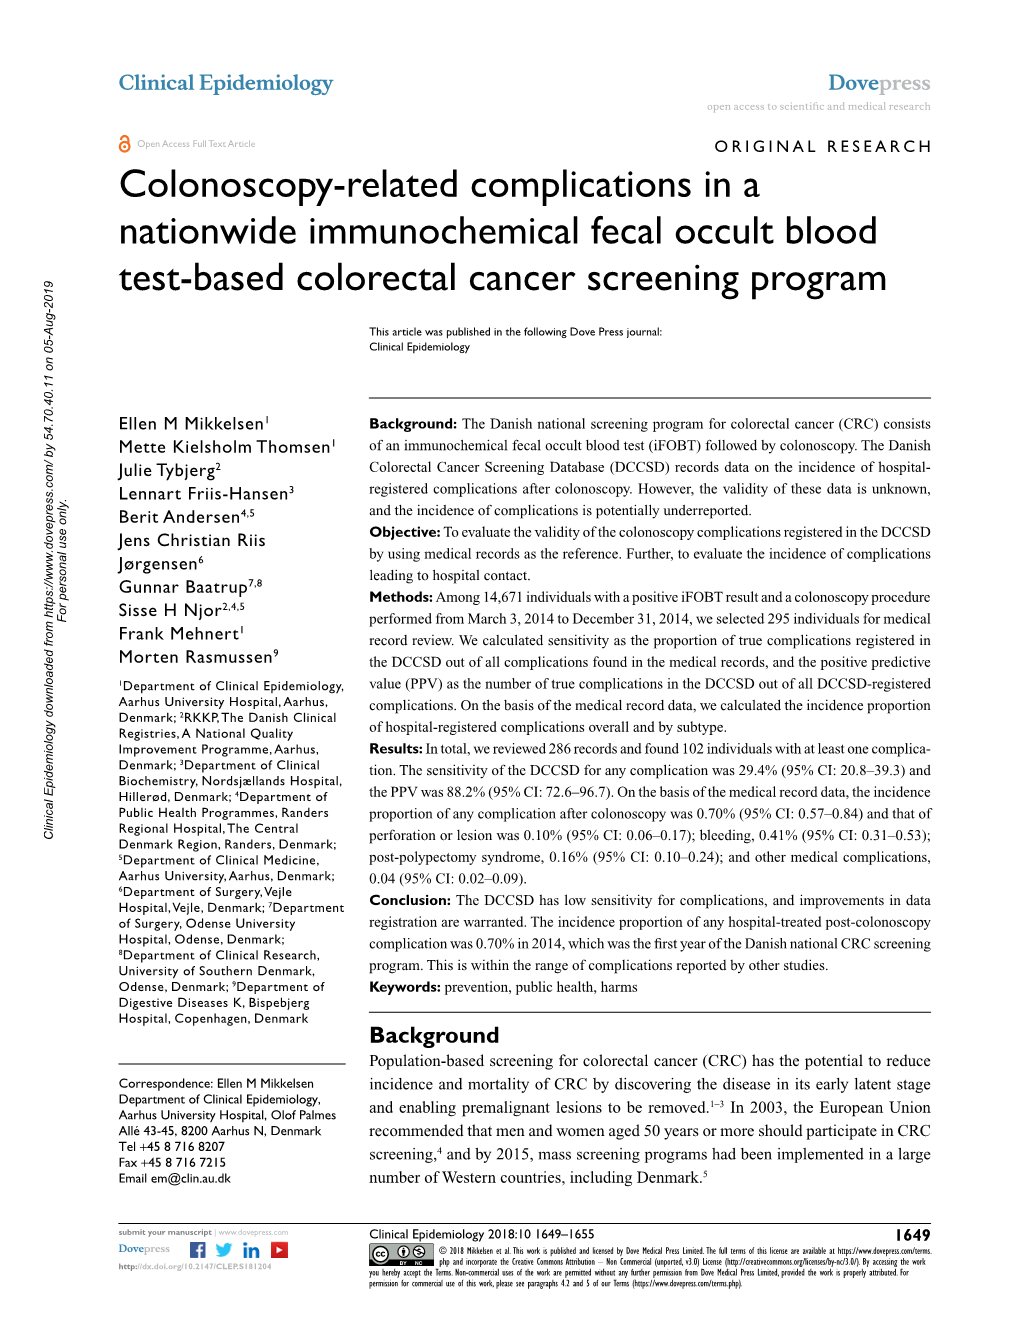 Colonoscopy-Related Complications in a Nationwide Immunochemical Fecal Occult Blood Test-Based Colorectal Cancer Screening Program